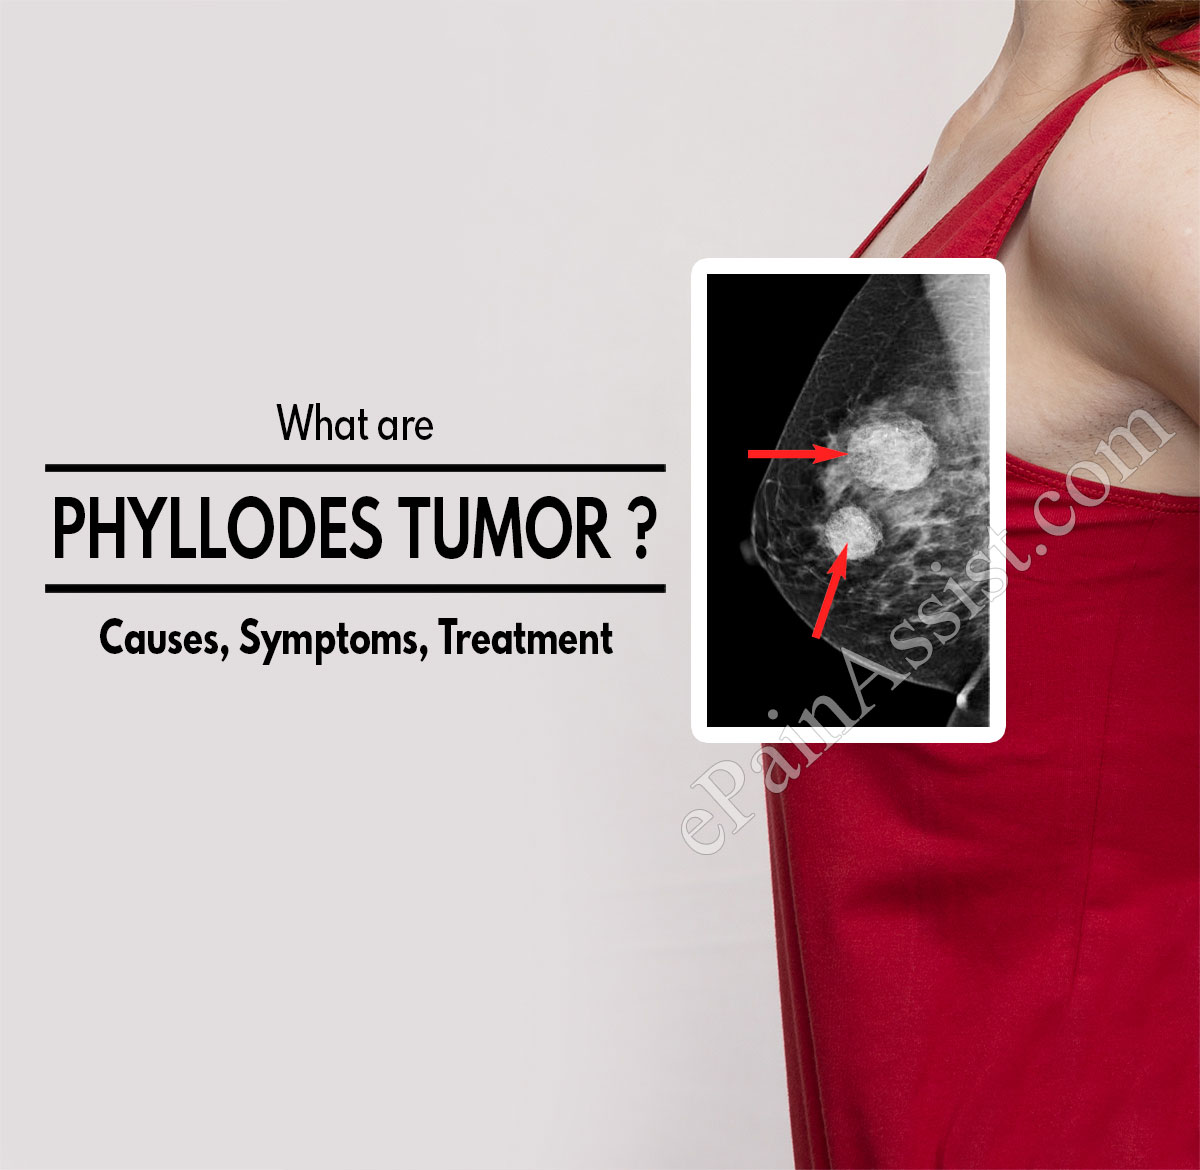 thesis on phyllodes tumor